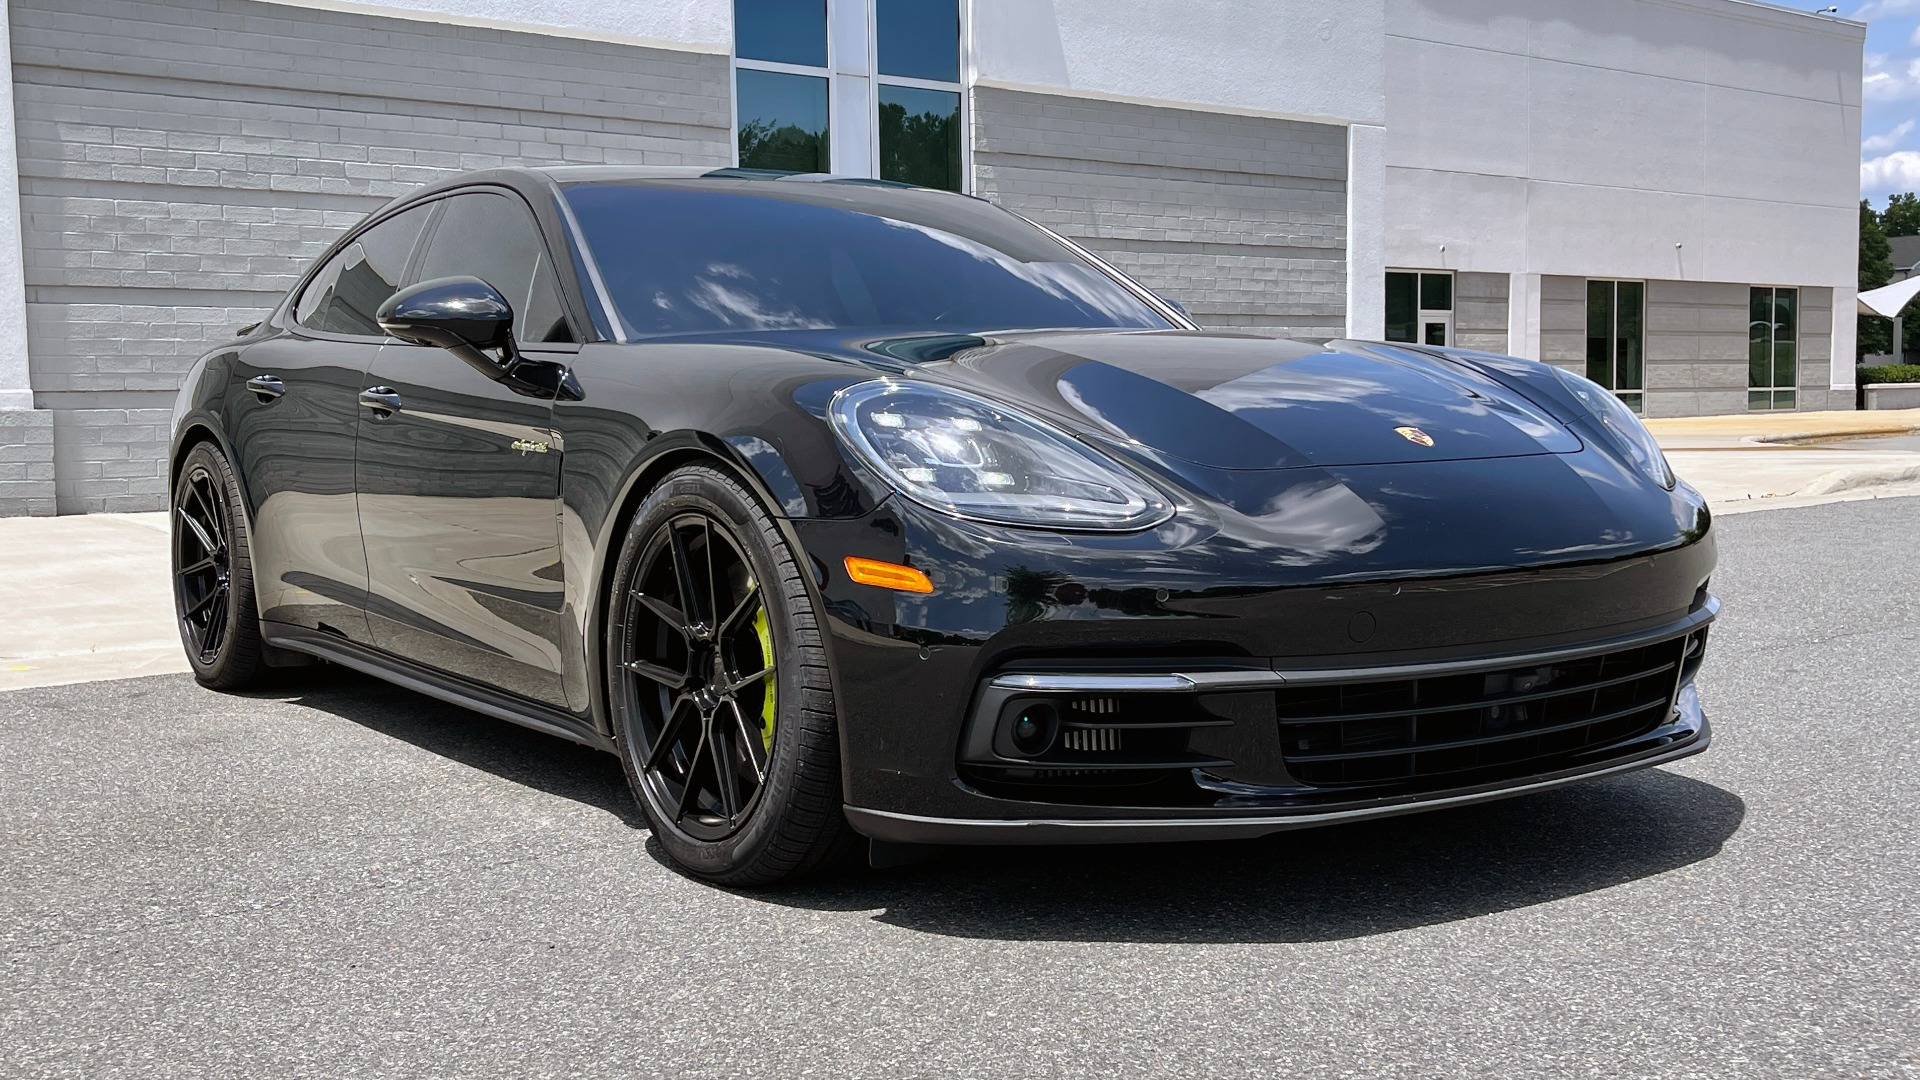 Used 2018 Porsche Panamera 4 E-Hybrid for sale $52,000 at Formula Imports in Charlotte NC 28227 6